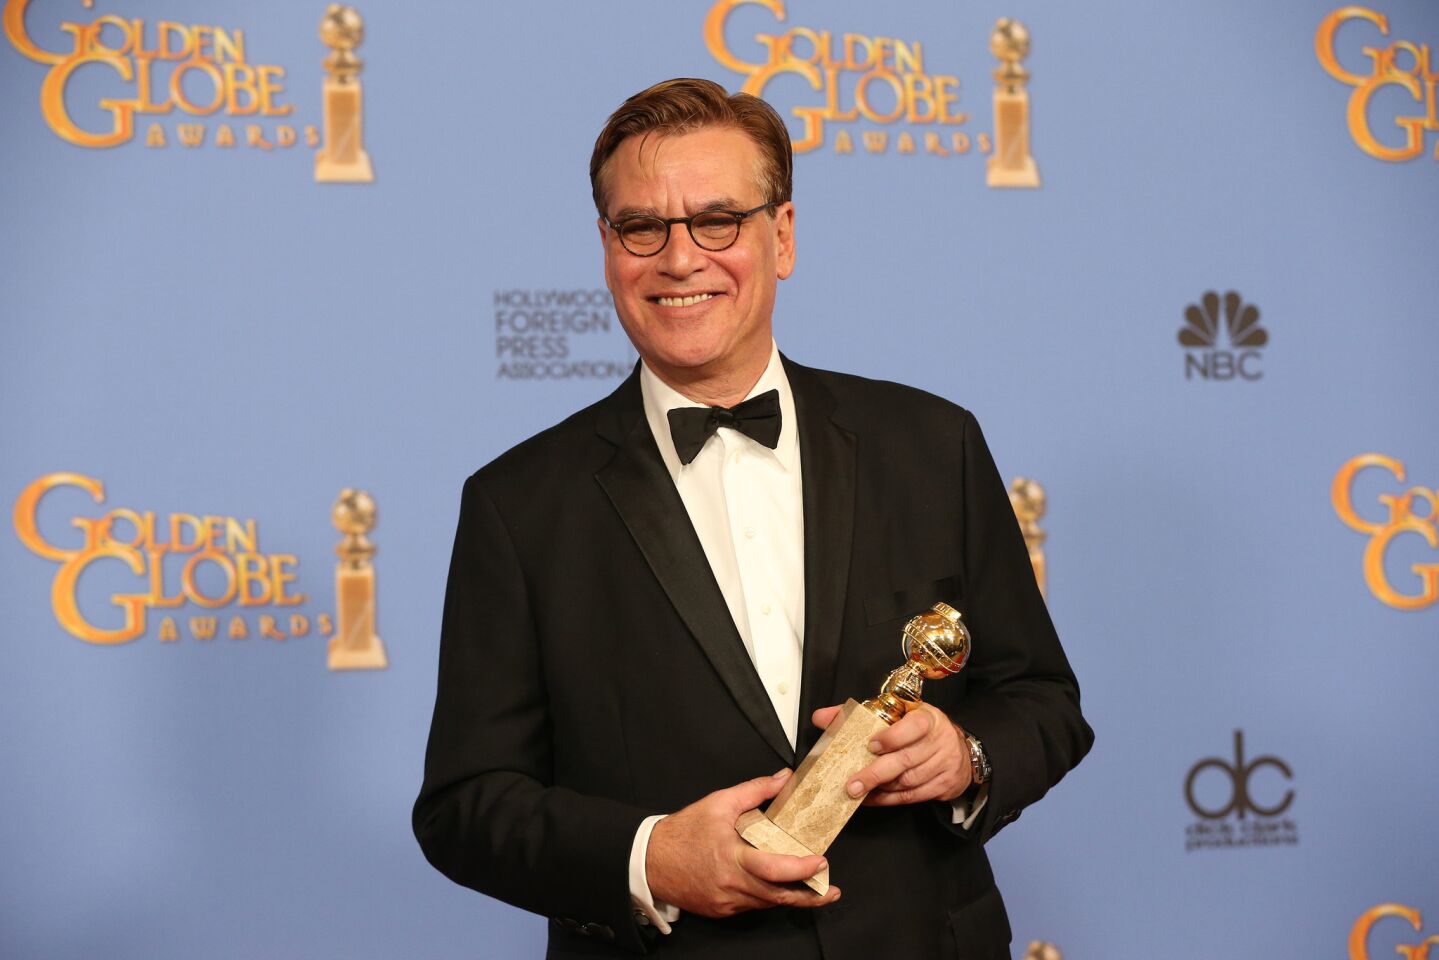 Aaron Sorkin, winner of Screenplay - Motion Picture for "Steve Jobs" at the 73rd Annual Golden Globe Awards show at the Beverly Hilton Hotel on Jan. 10, 2016.